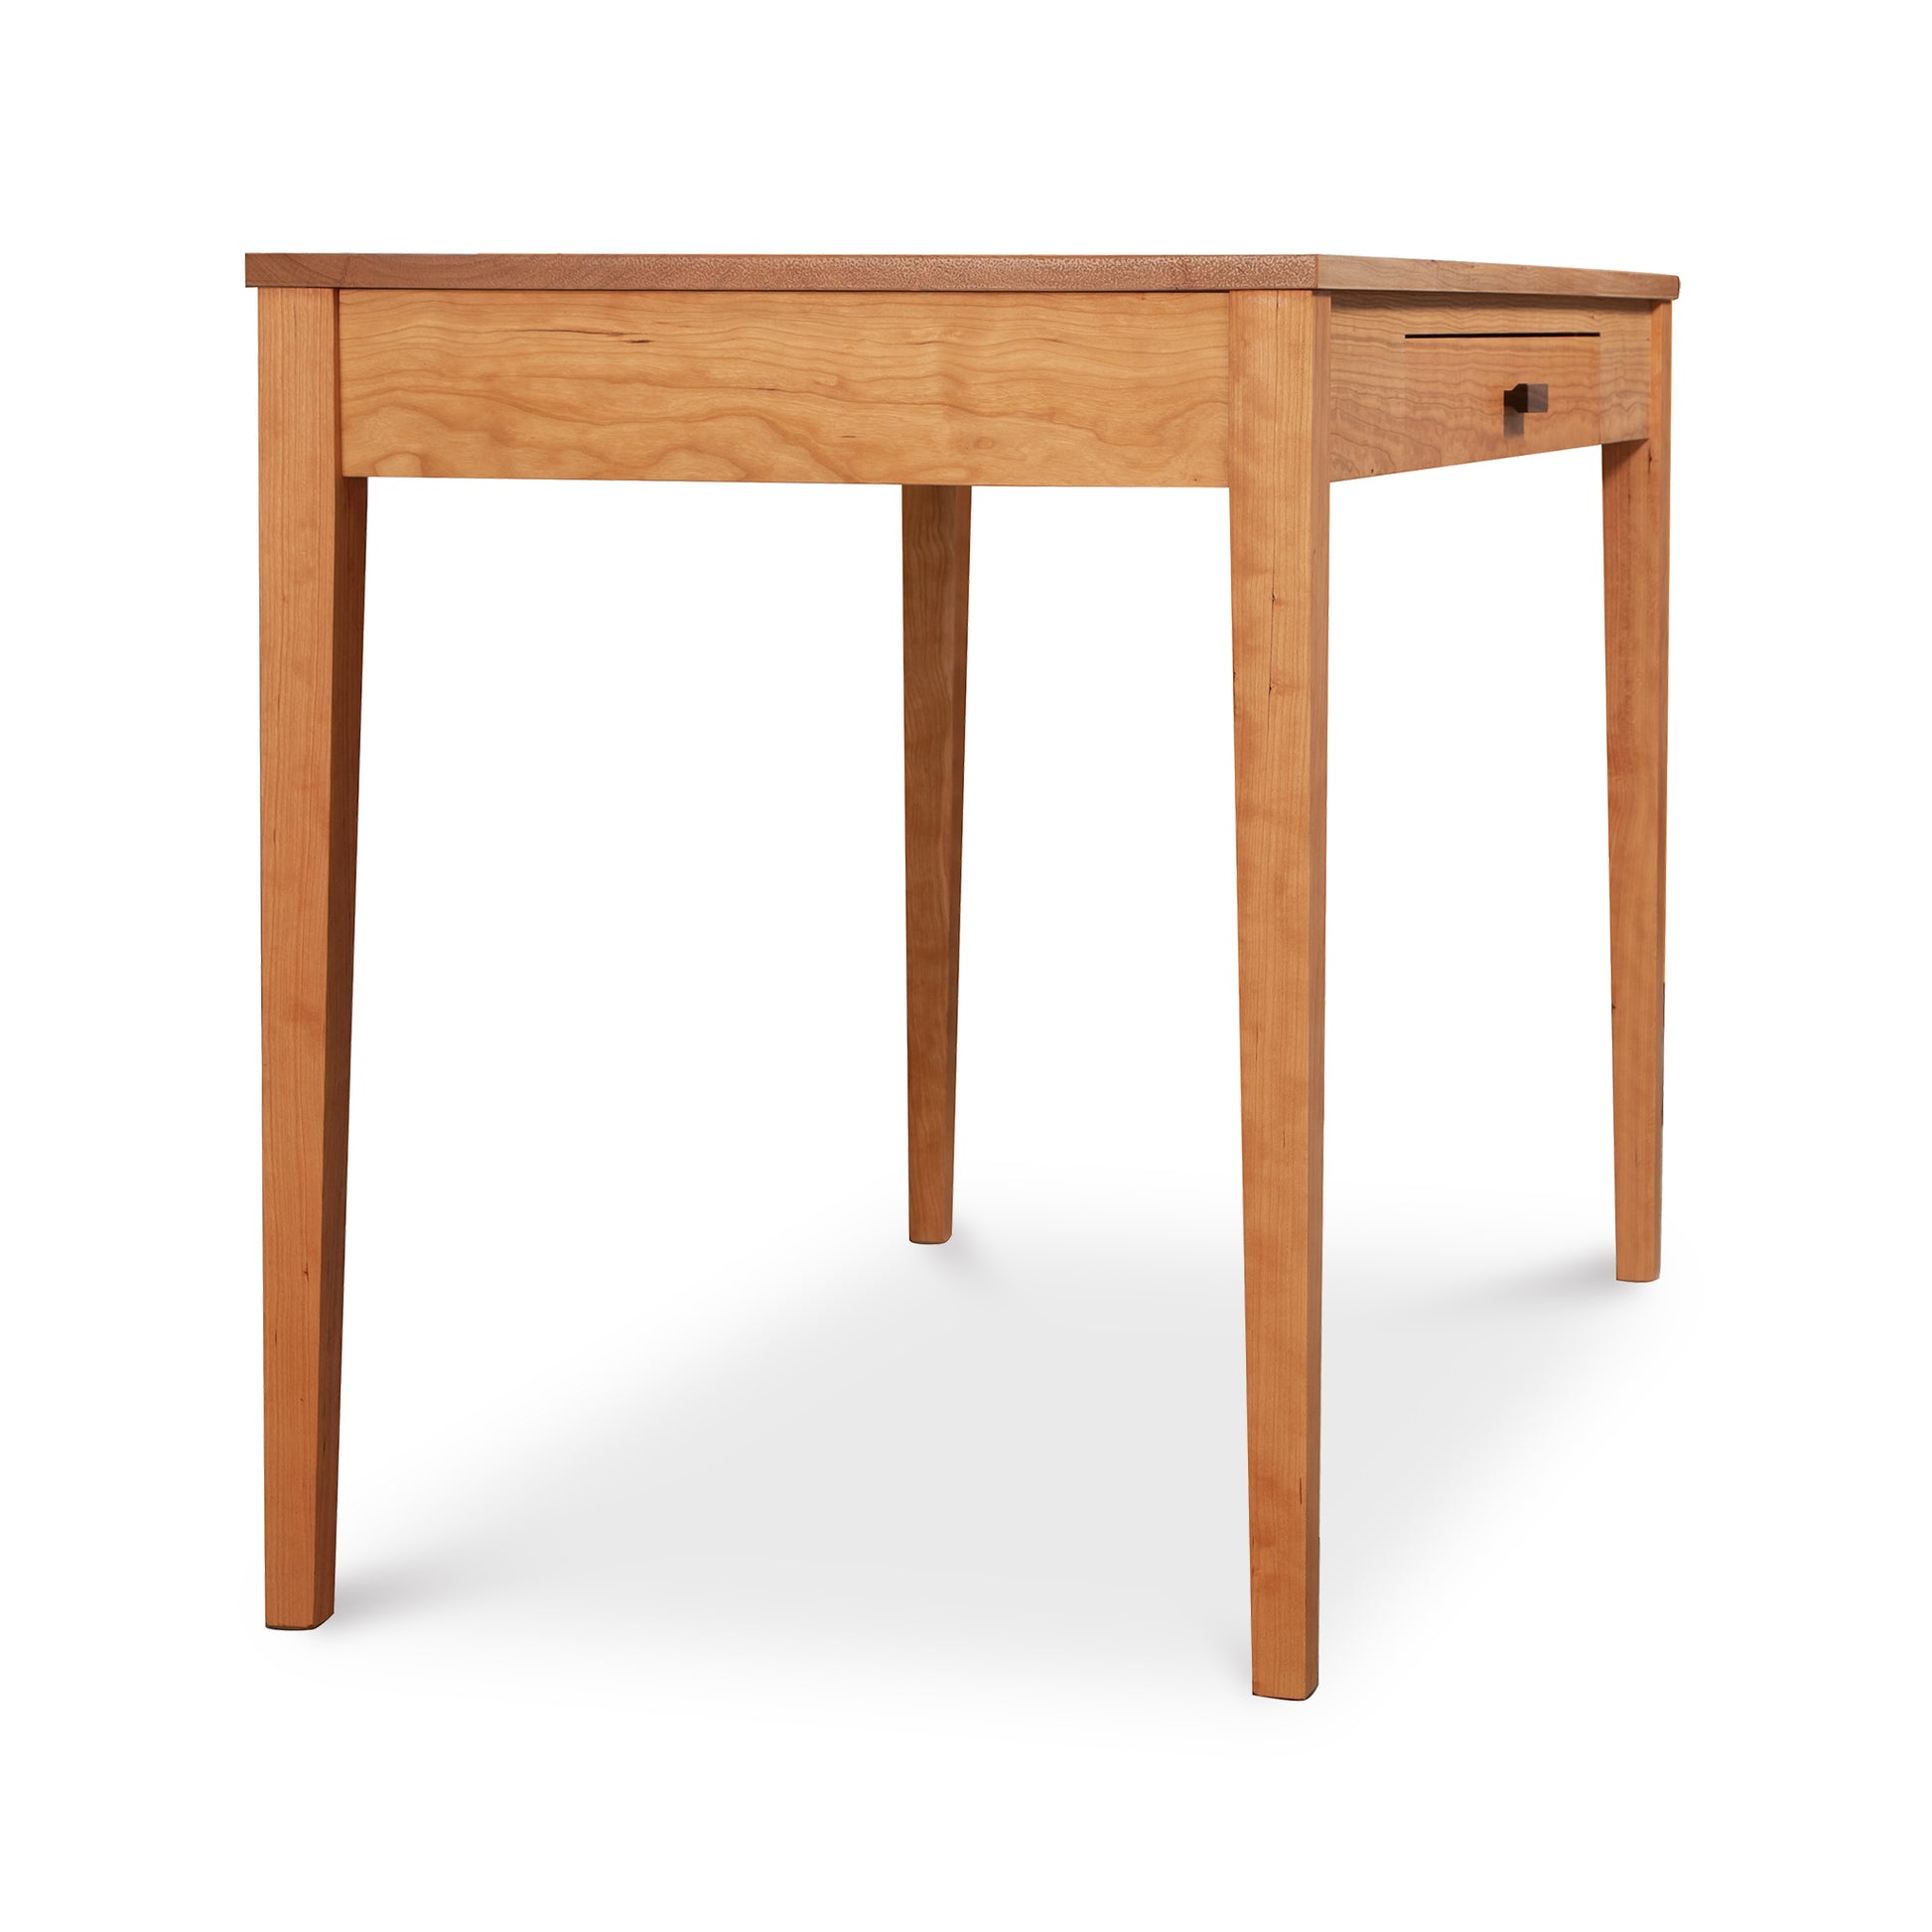 A Maple Corner Woodworks Andover Modern Writing Desk with a single drawer, isolated on a white background.